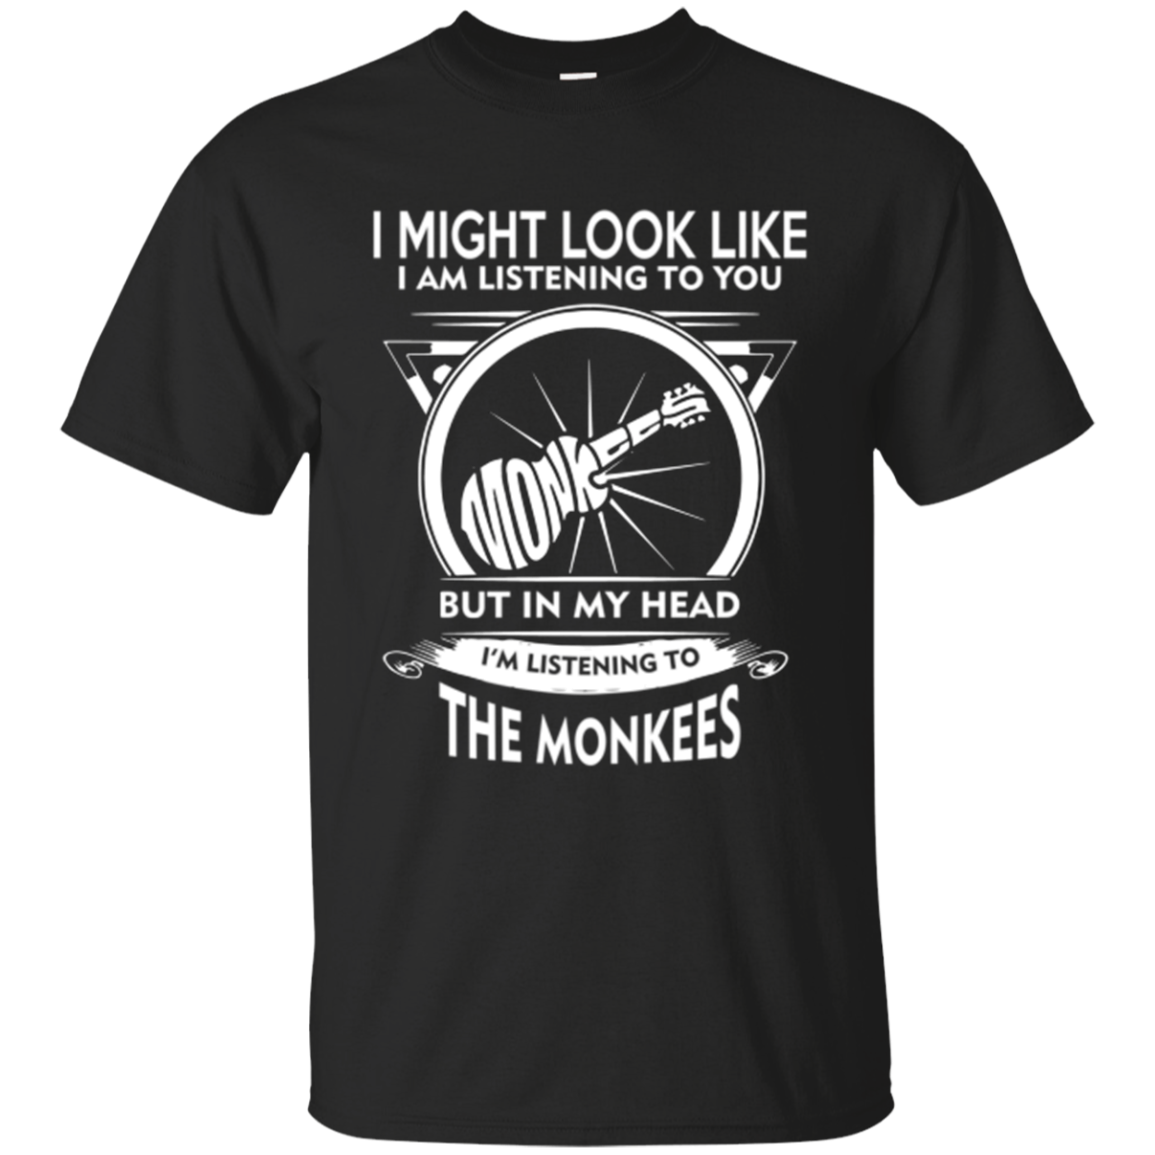 The Monkees T shirts But In My Head I'm Listening To The Monkees ...